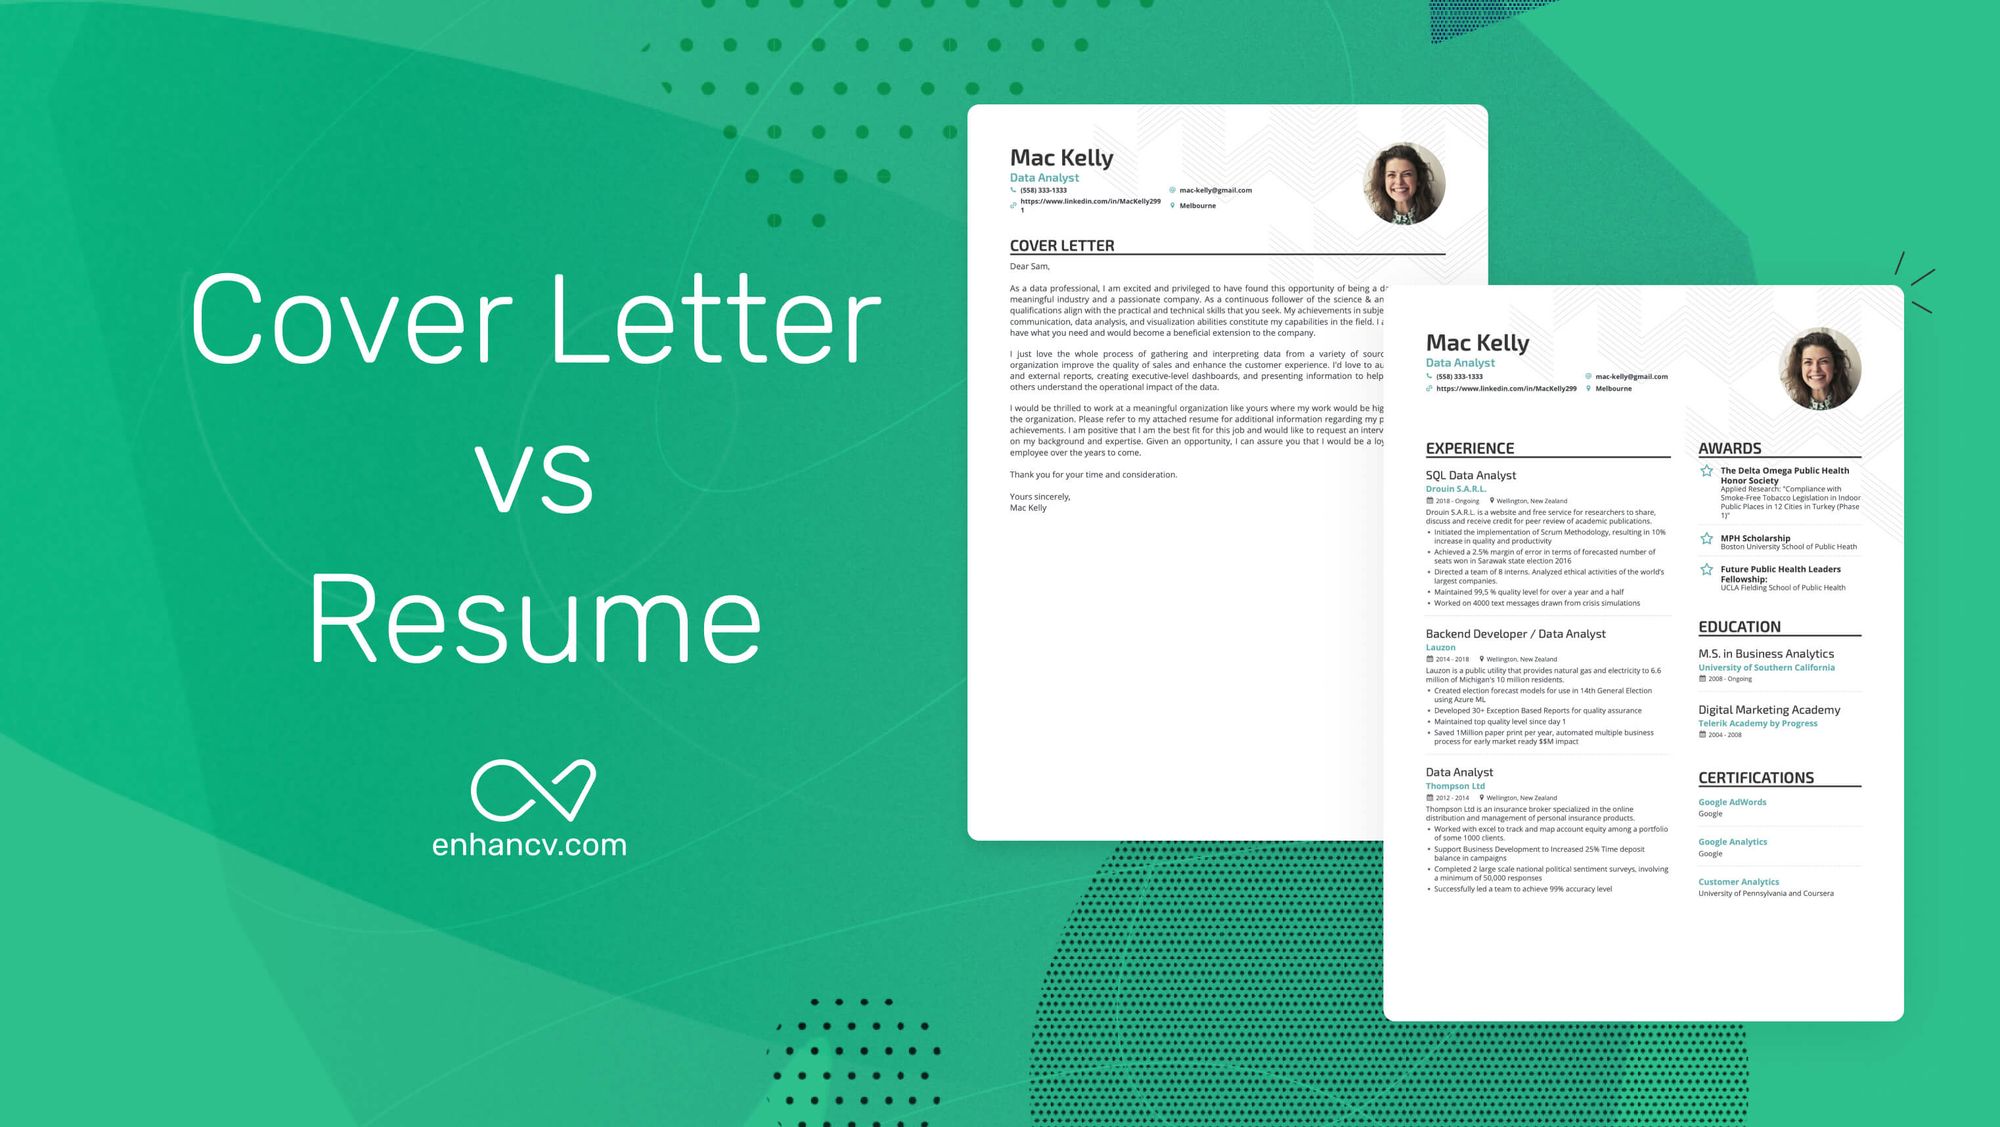 xplain the main difference between resume and cover letters